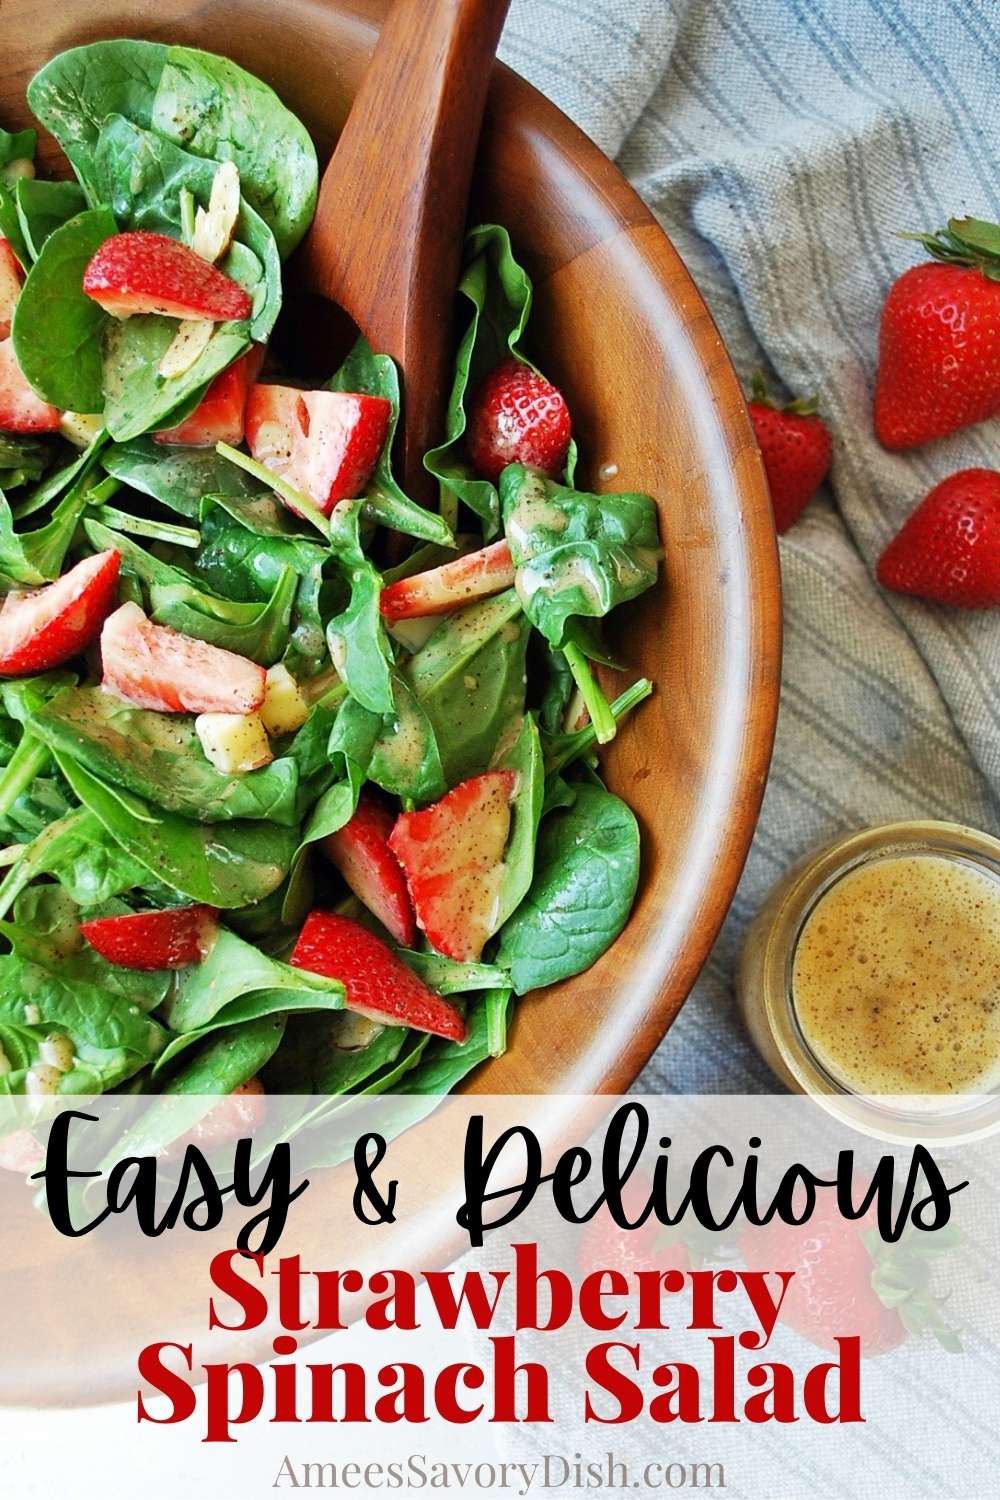 This easy strawberry spinach salad is the perfect summertime side dish made with baby spinach, sliced almonds, fresh berries, and a homemade poppyseed dressing. via @Ameessavorydish